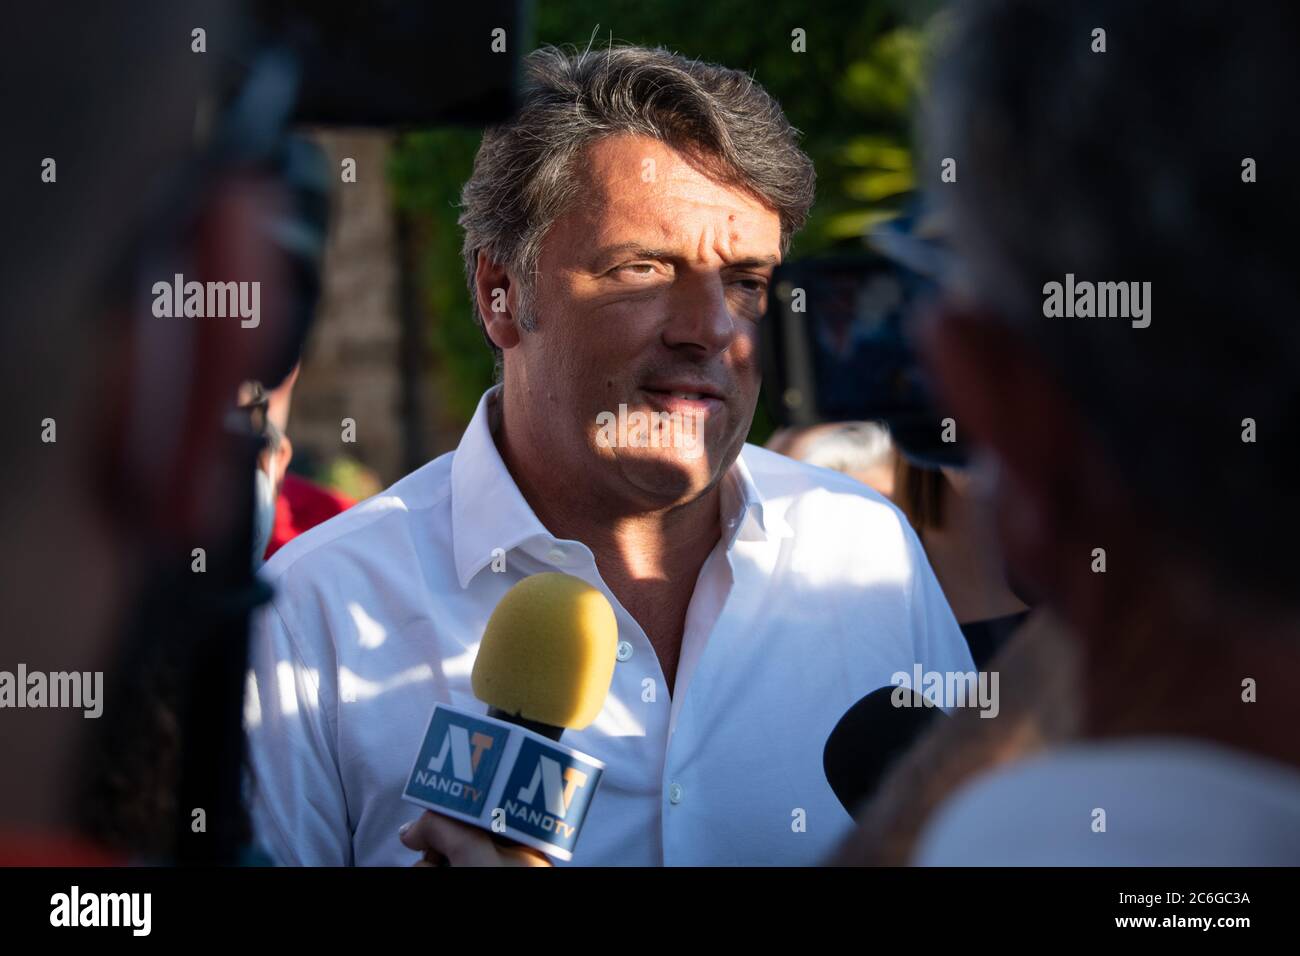 Caserta, Italy. 09th July, 2020. The leader of 'Italia Viva' Matteo Renzi arrives in Caserta to support the candidate Nicola Caputo in the next regional elections.He also speaks about his latest book 'La mossa del cavallo'. In the picture: Matteo Renzi (Photo by Gennaro Buco/Pacific Press) Credit: Pacific Press Agency/Alamy Live News Stock Photo